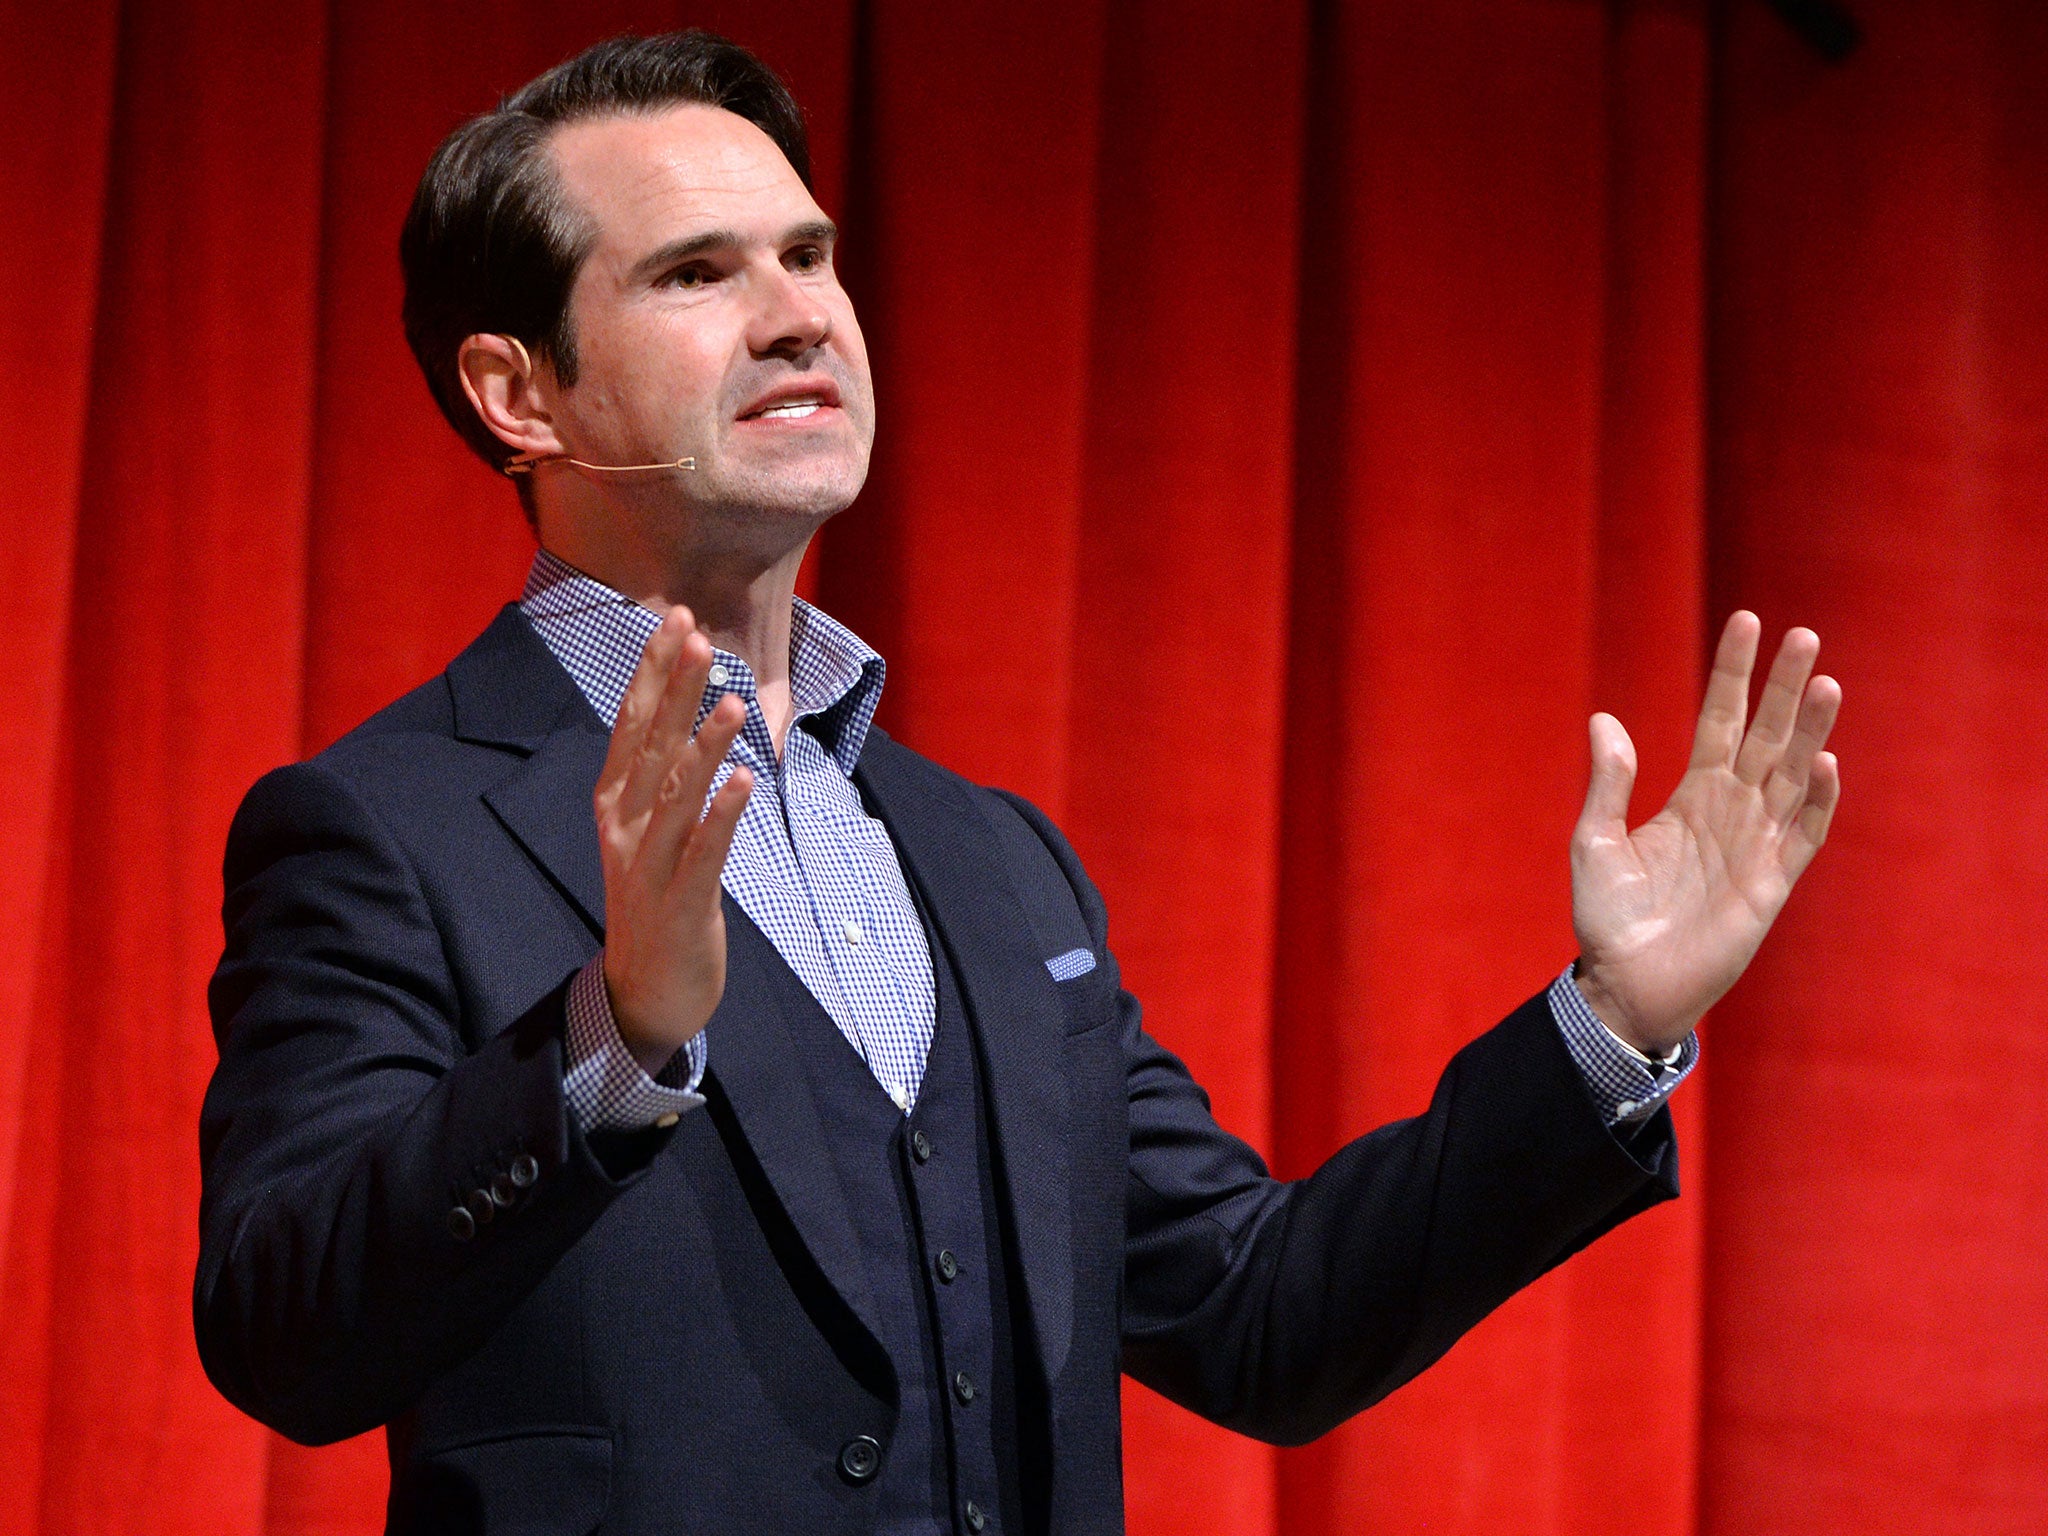 Jimmy Carr, unlike TS Eliot, has no need of patrons such as Francis Bacon’s Lady Sainsbury